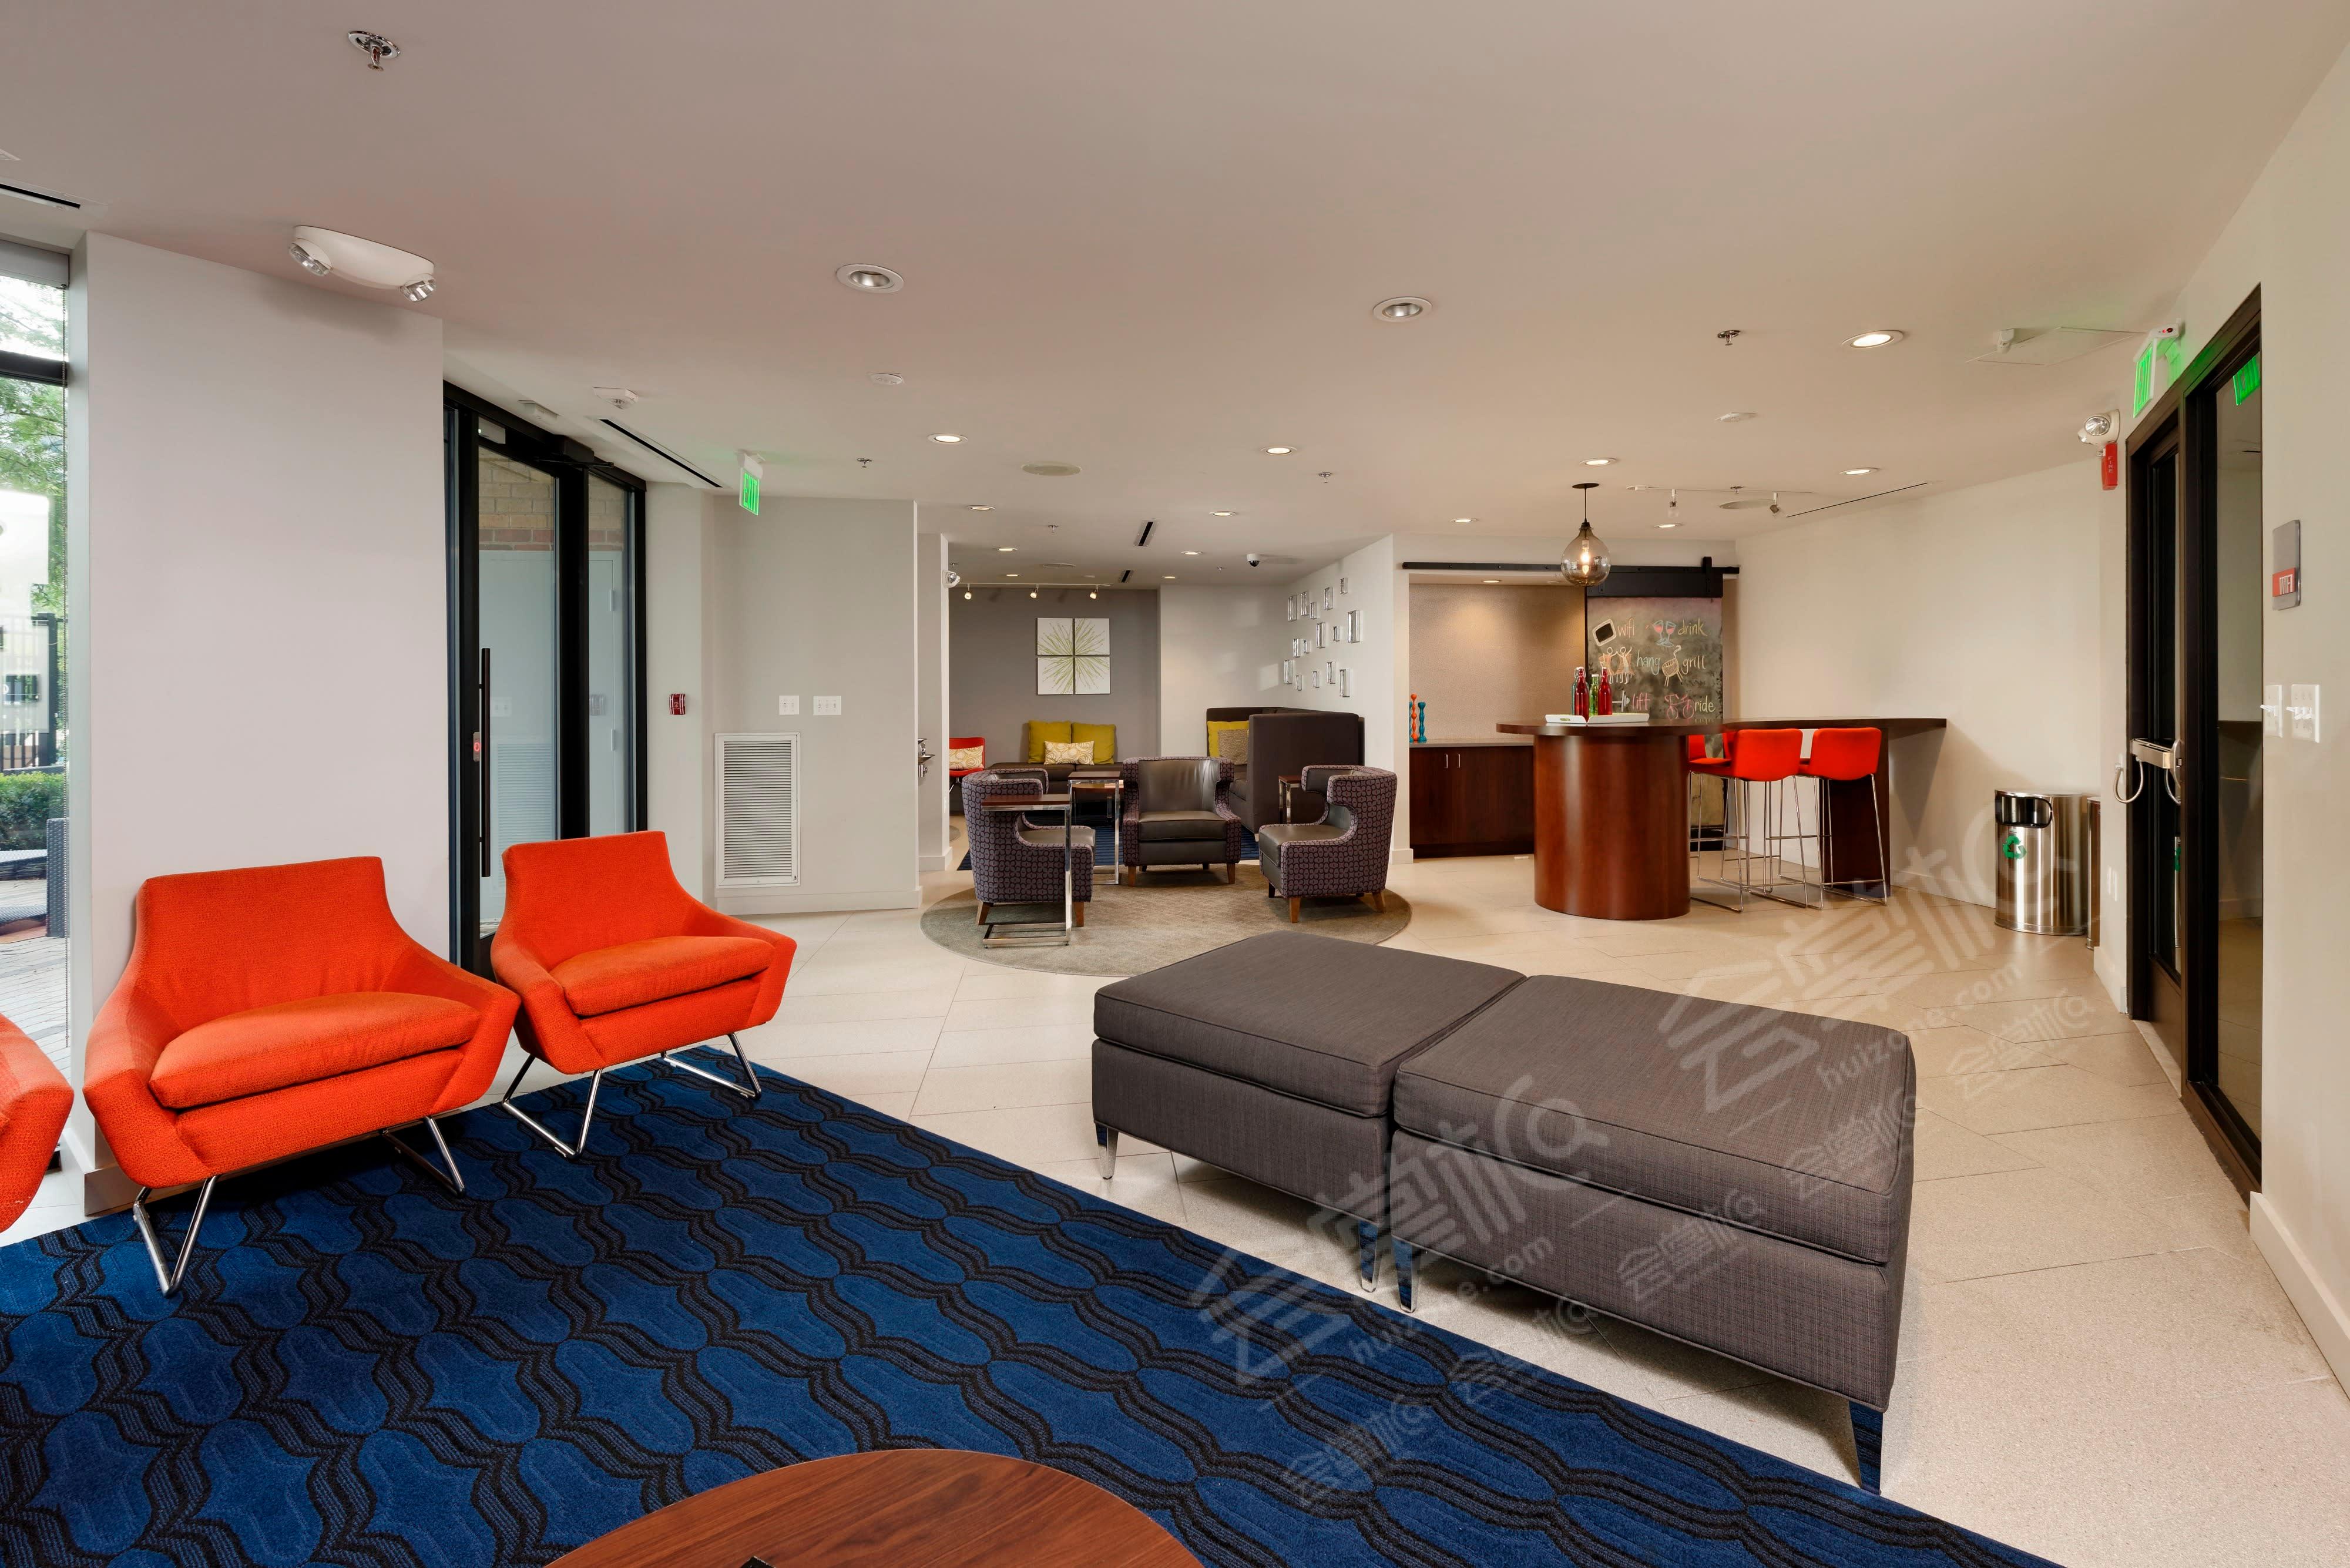 Urban-Inspired, Private Lounge in the Heart of Ballston